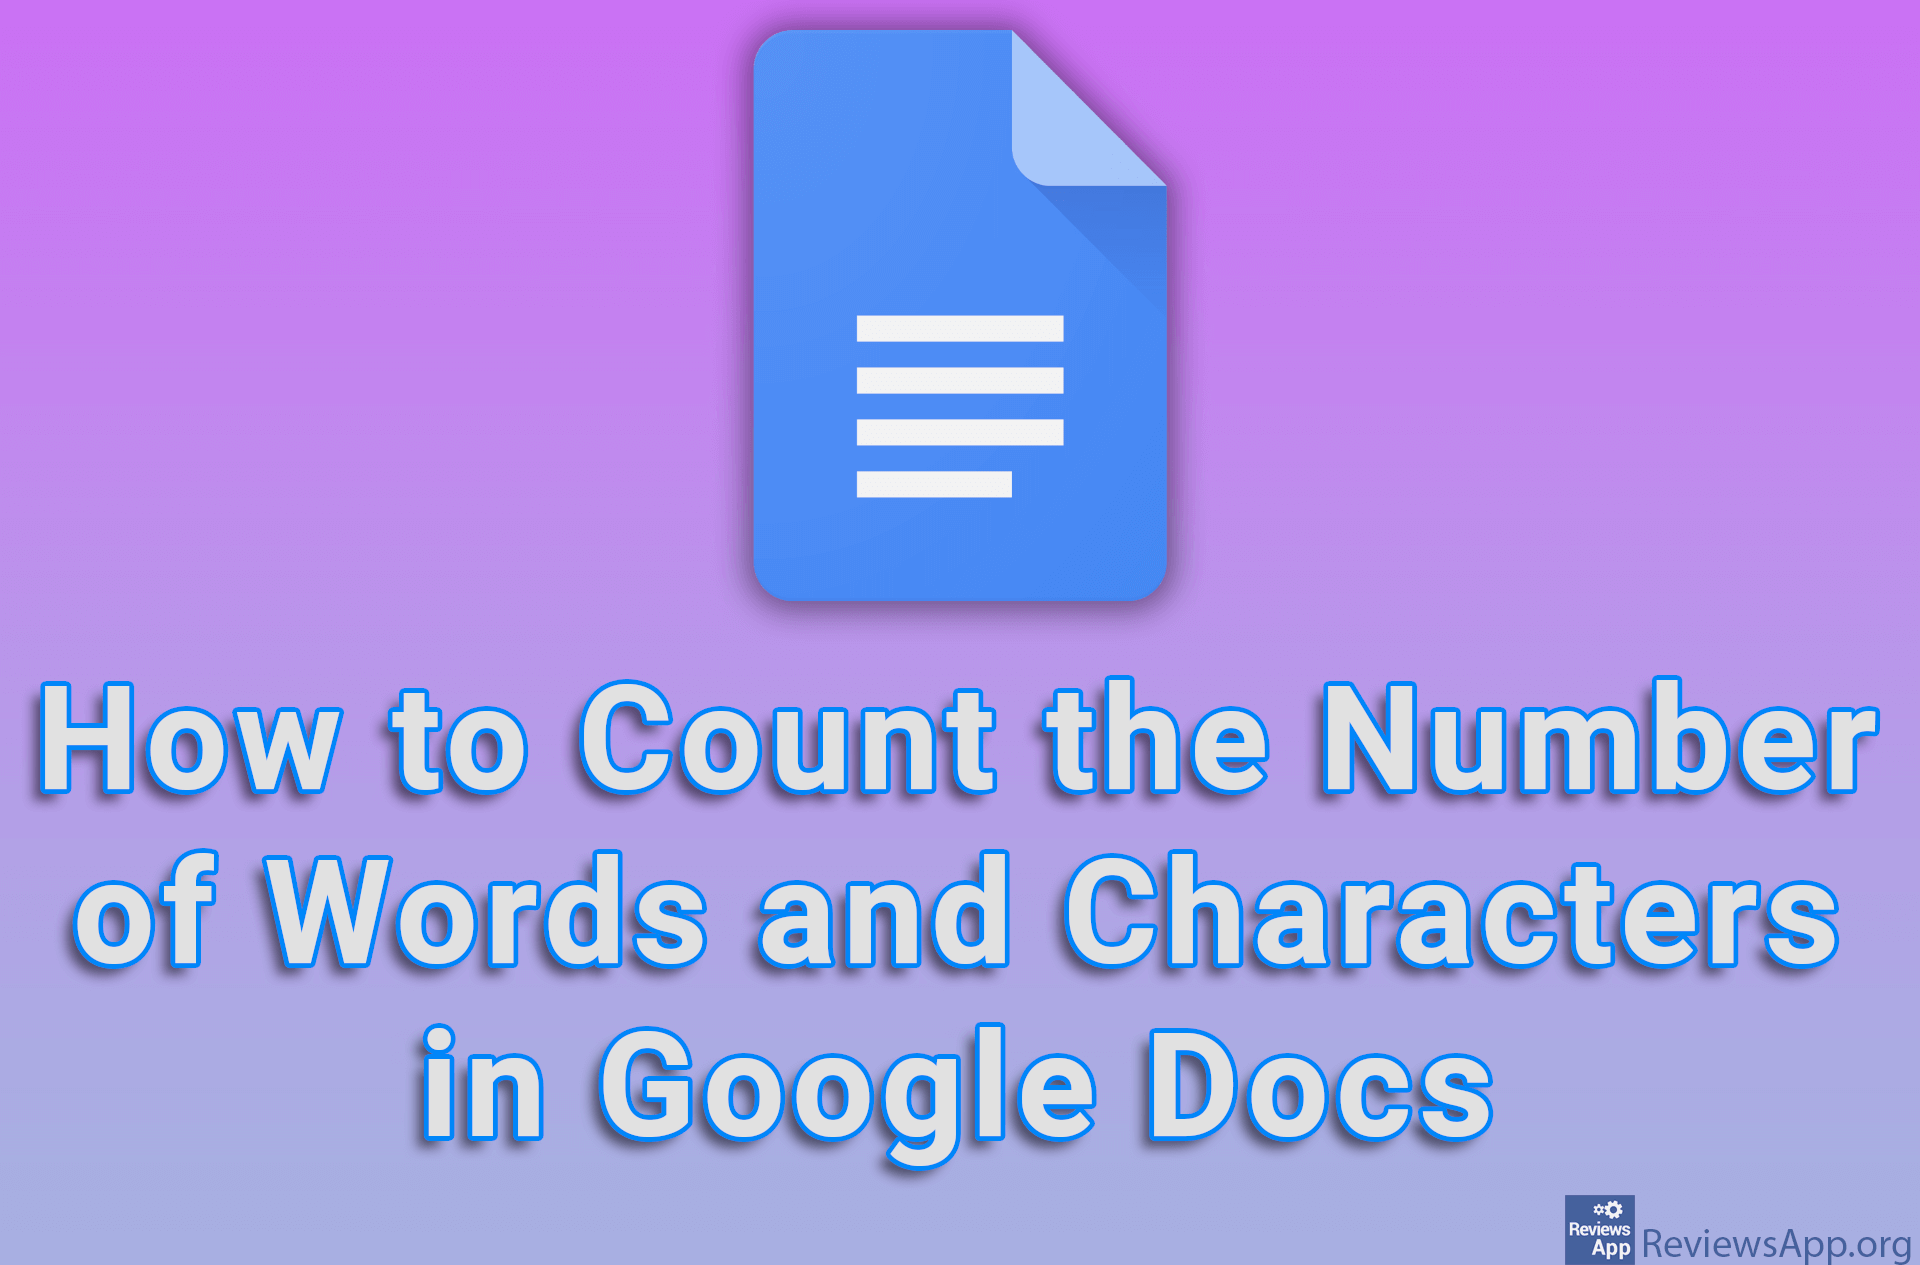 How to Count the Number of Words and Characters in Google Docs